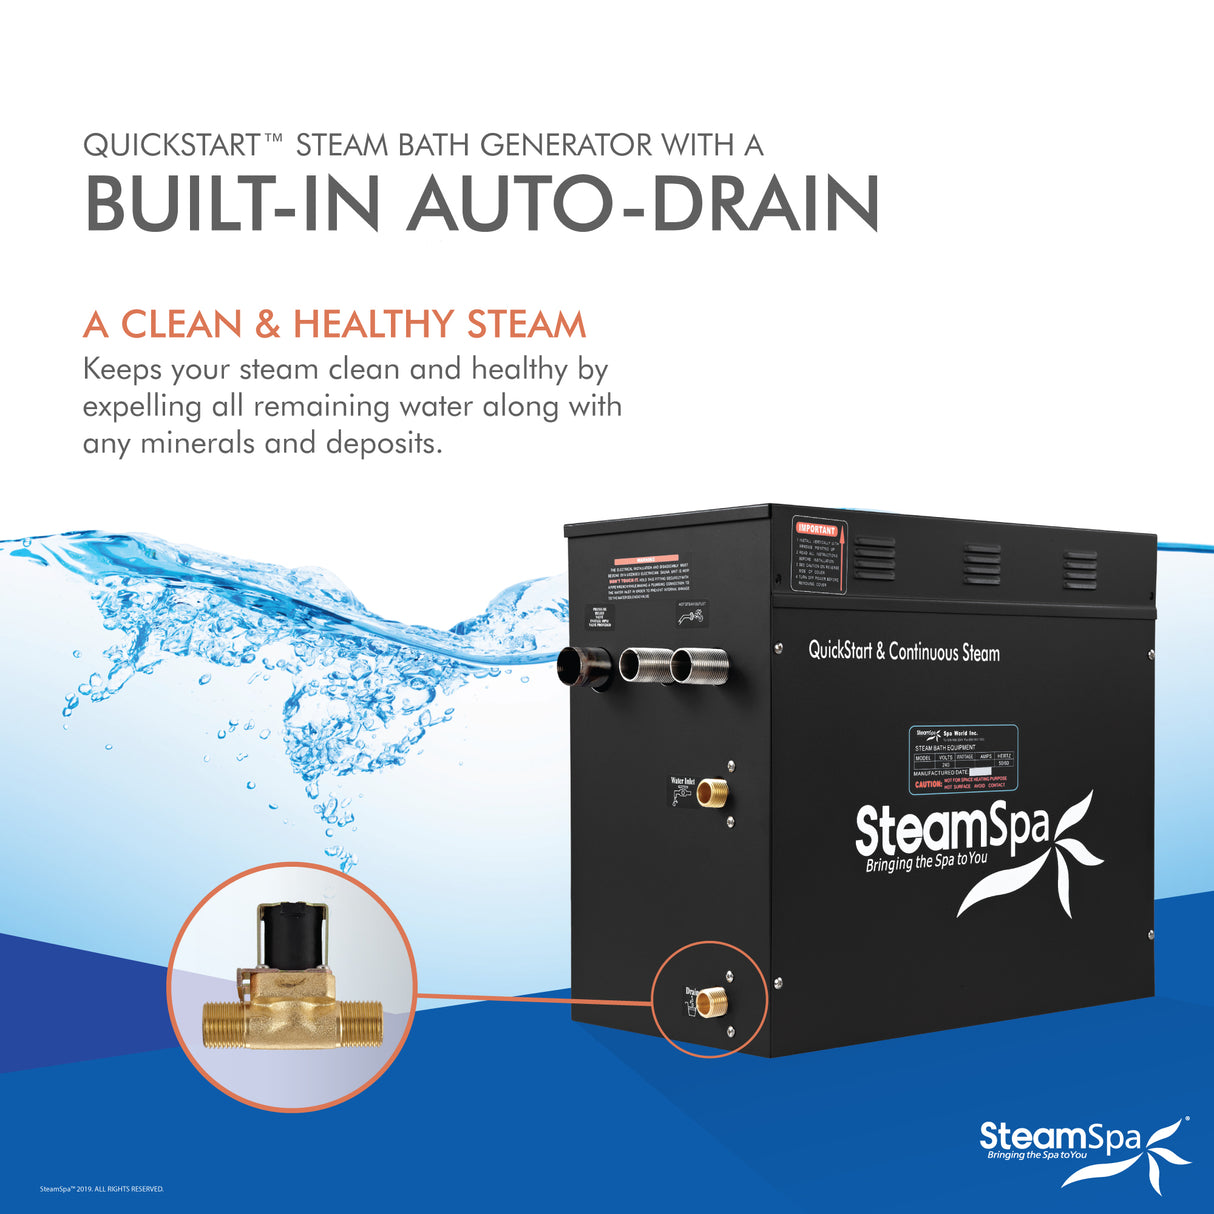 Black Series Wifi and Bluetooth 10.5kW QuickStart Steam Bath Generator Package in Polished Chrome BKT1050CH-A